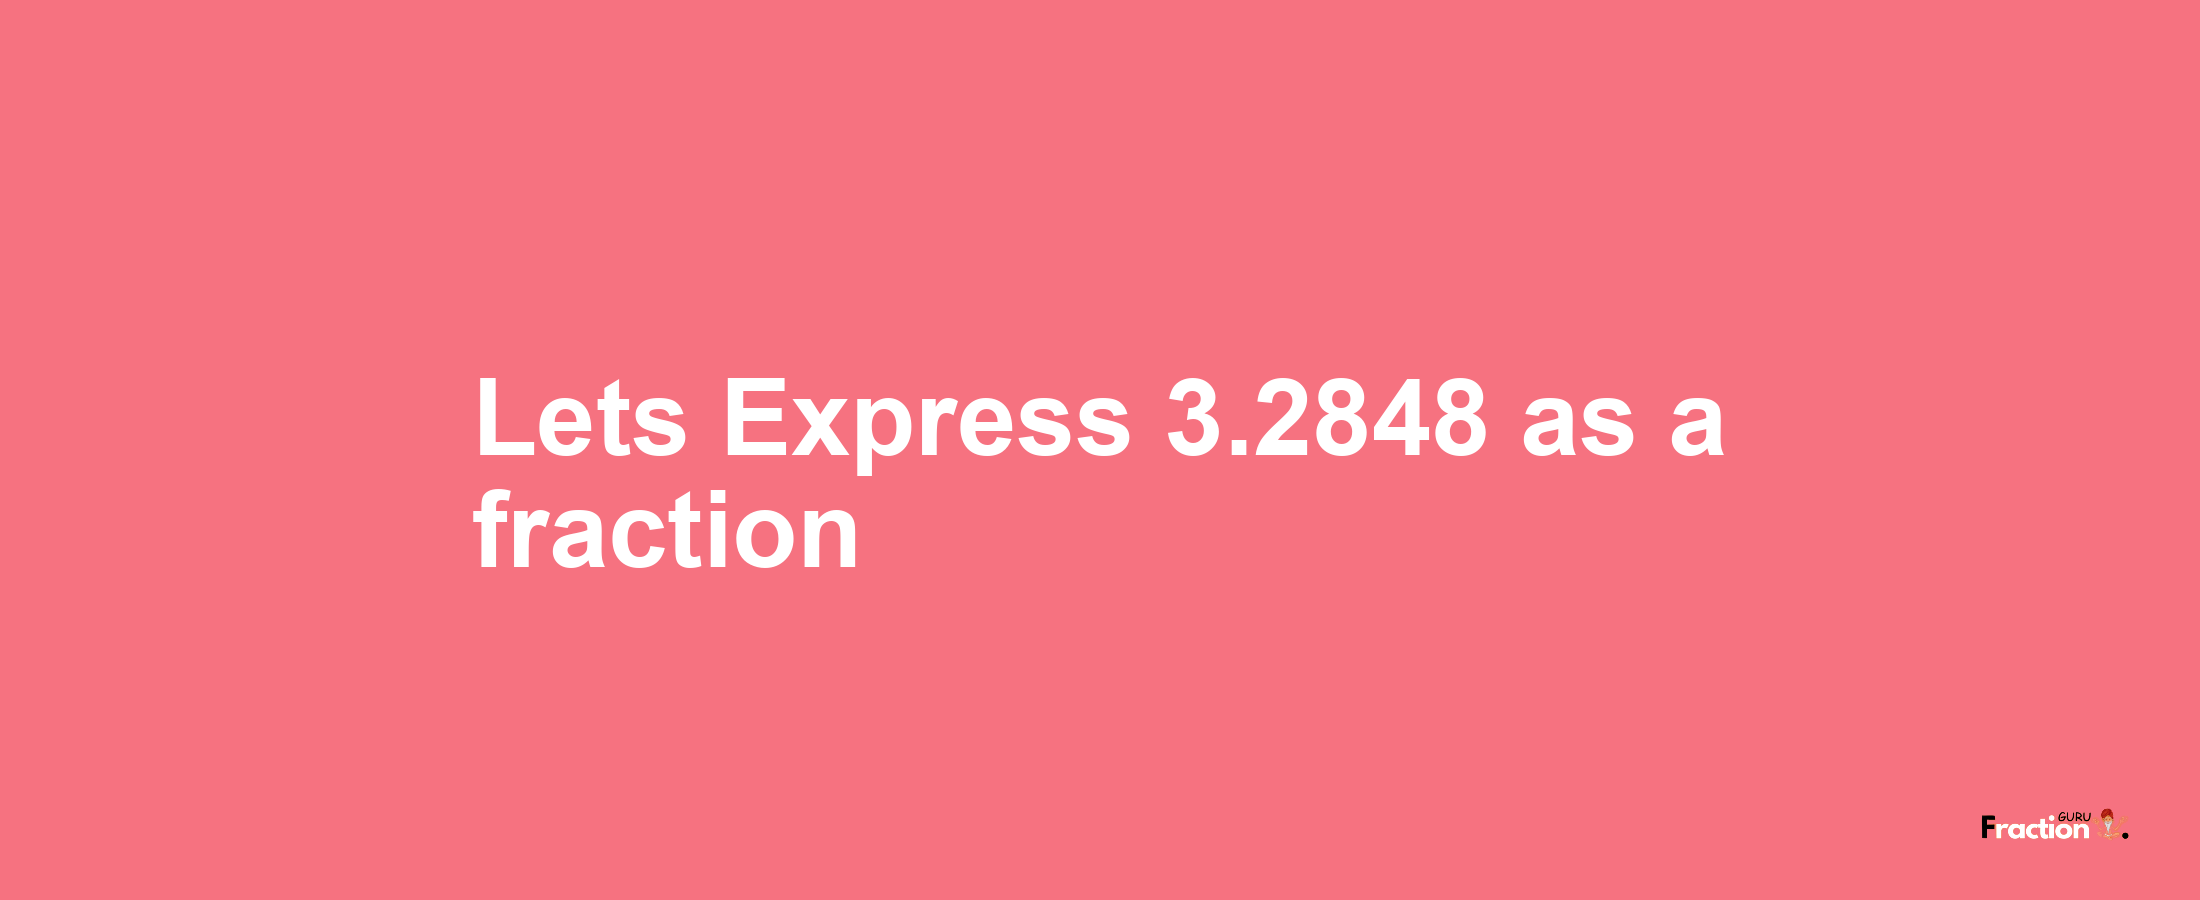 Lets Express 3.2848 as afraction